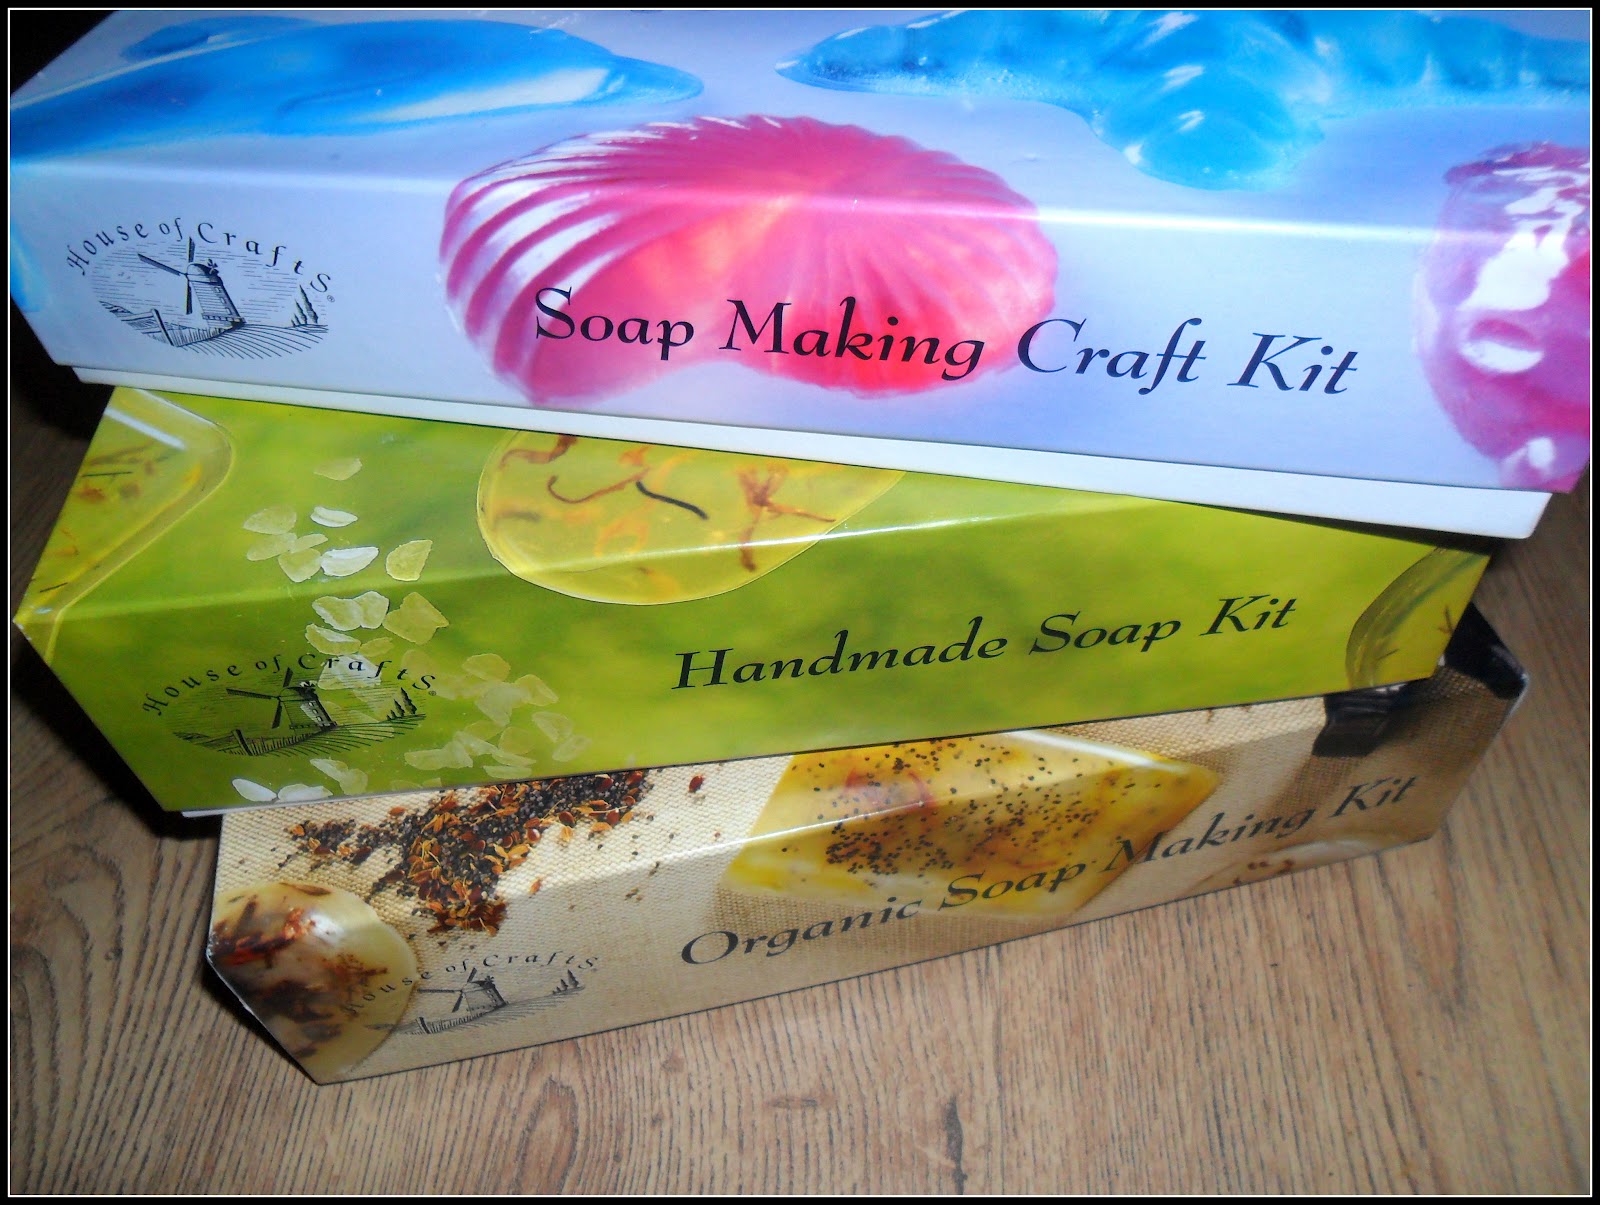 Veelicious-ness!: DIY: Soap: House of Crafts Soapmaking Kit Comparison